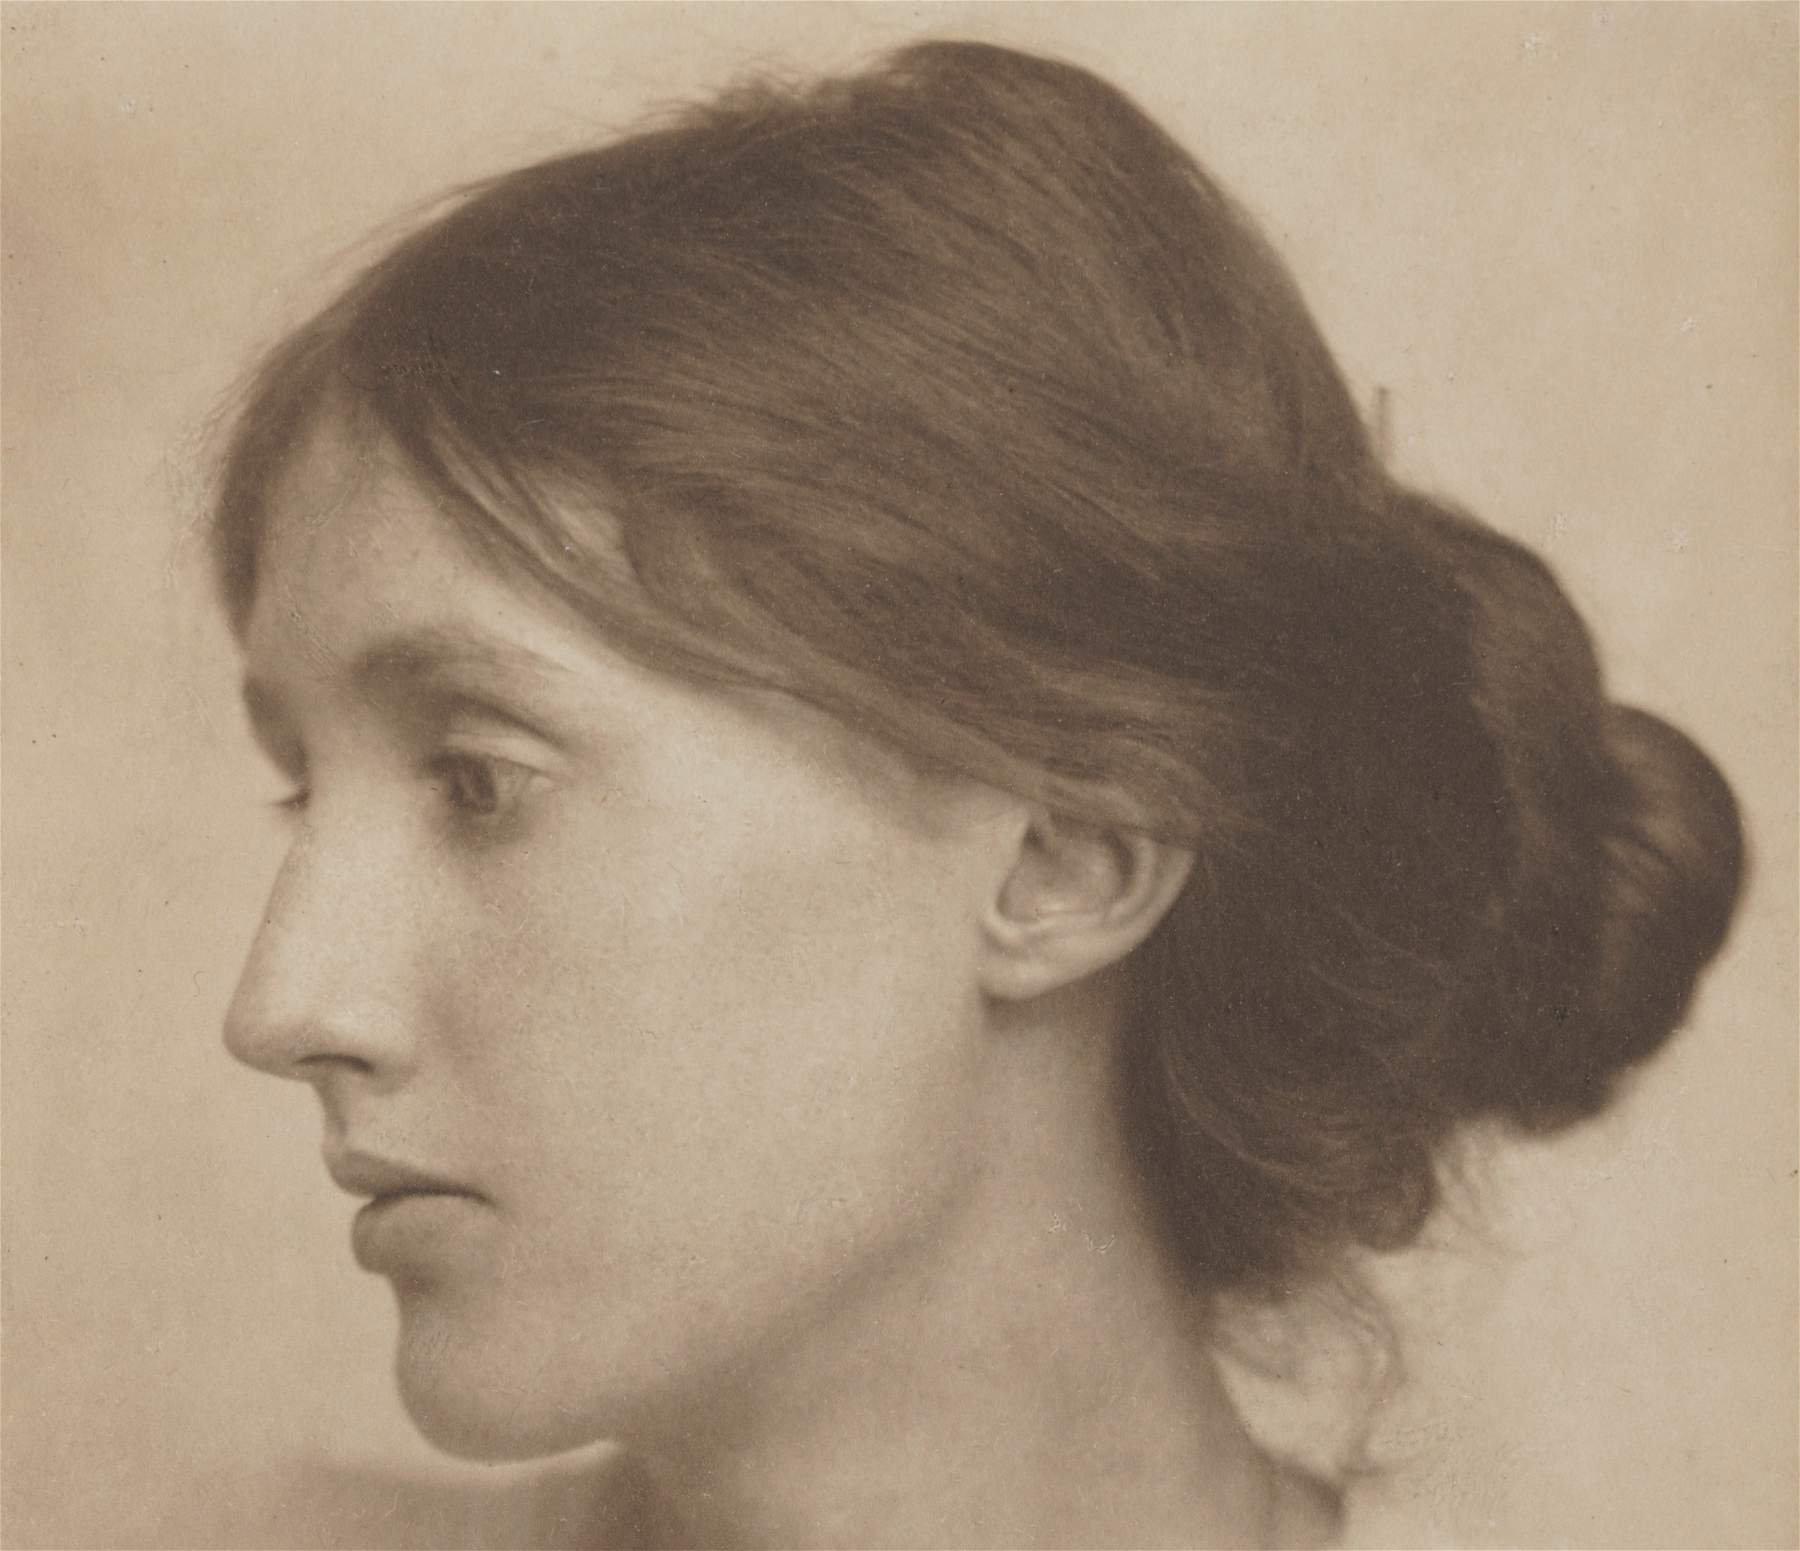 Palazzo Altemps dedicates an exhibition to Virginia Woolf and the Bloomsbury neighborhood